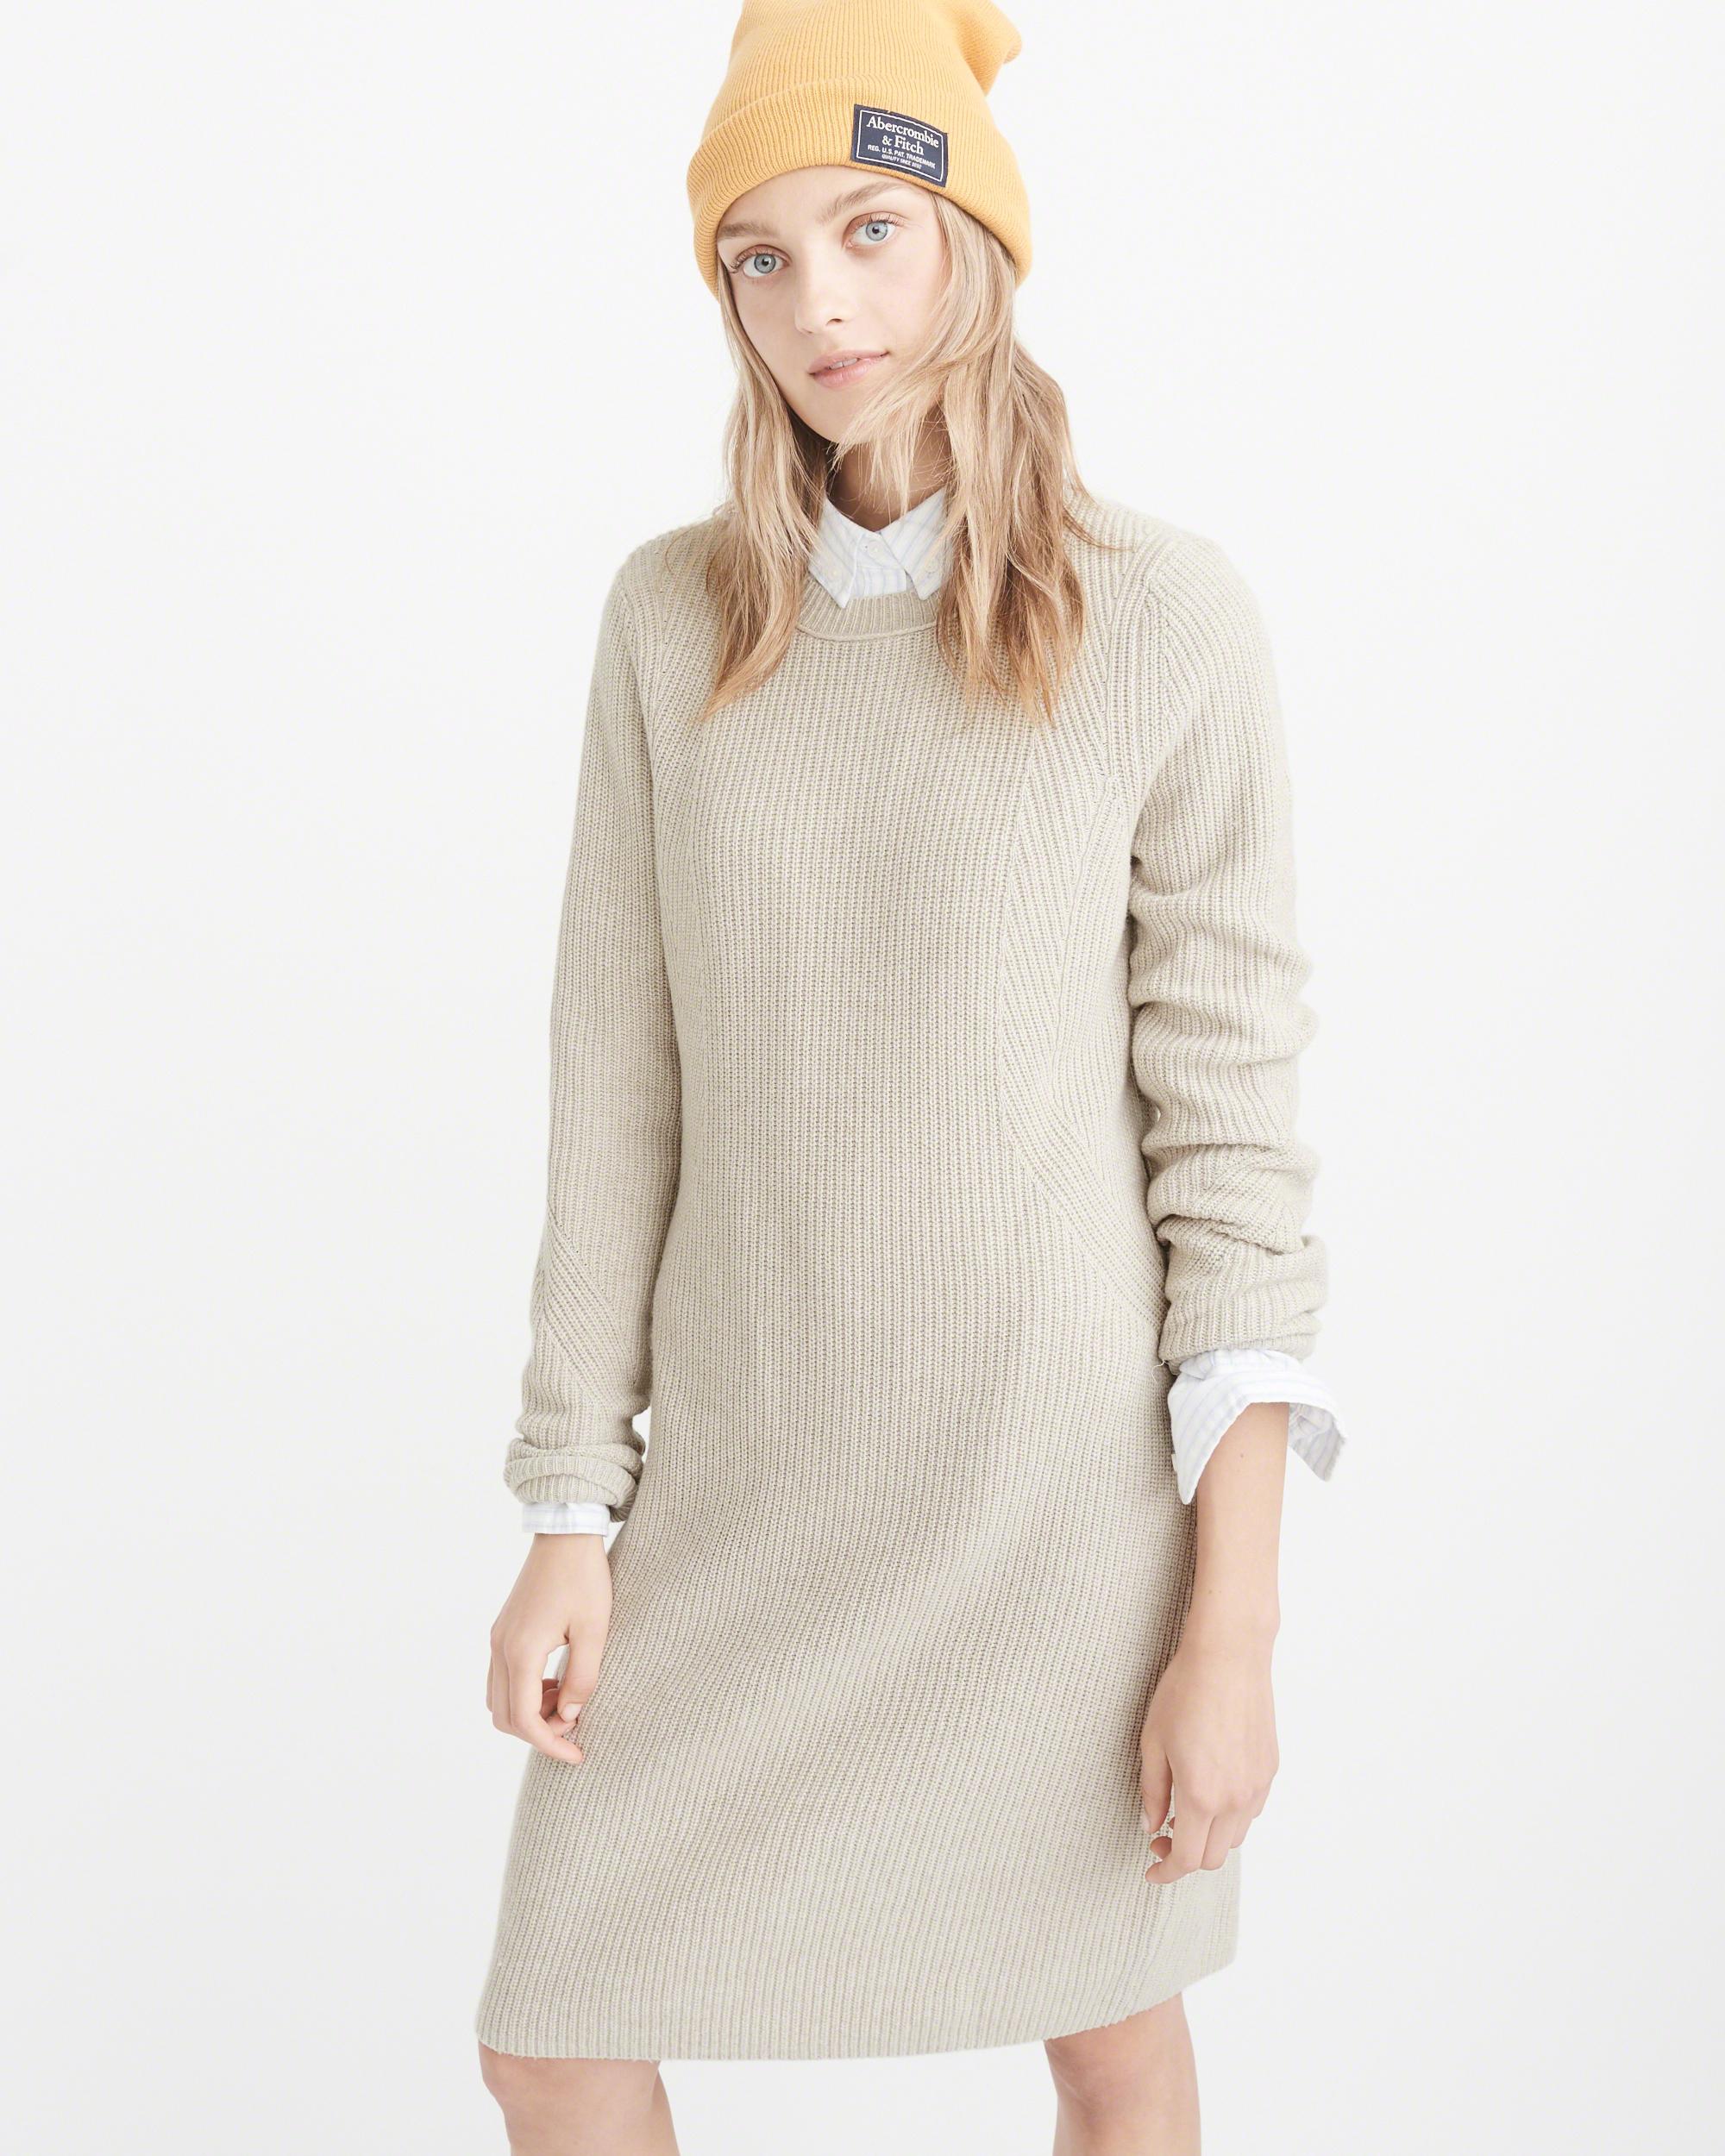 Lyst - Abercrombie & Fitch Sweater Dress in Natural